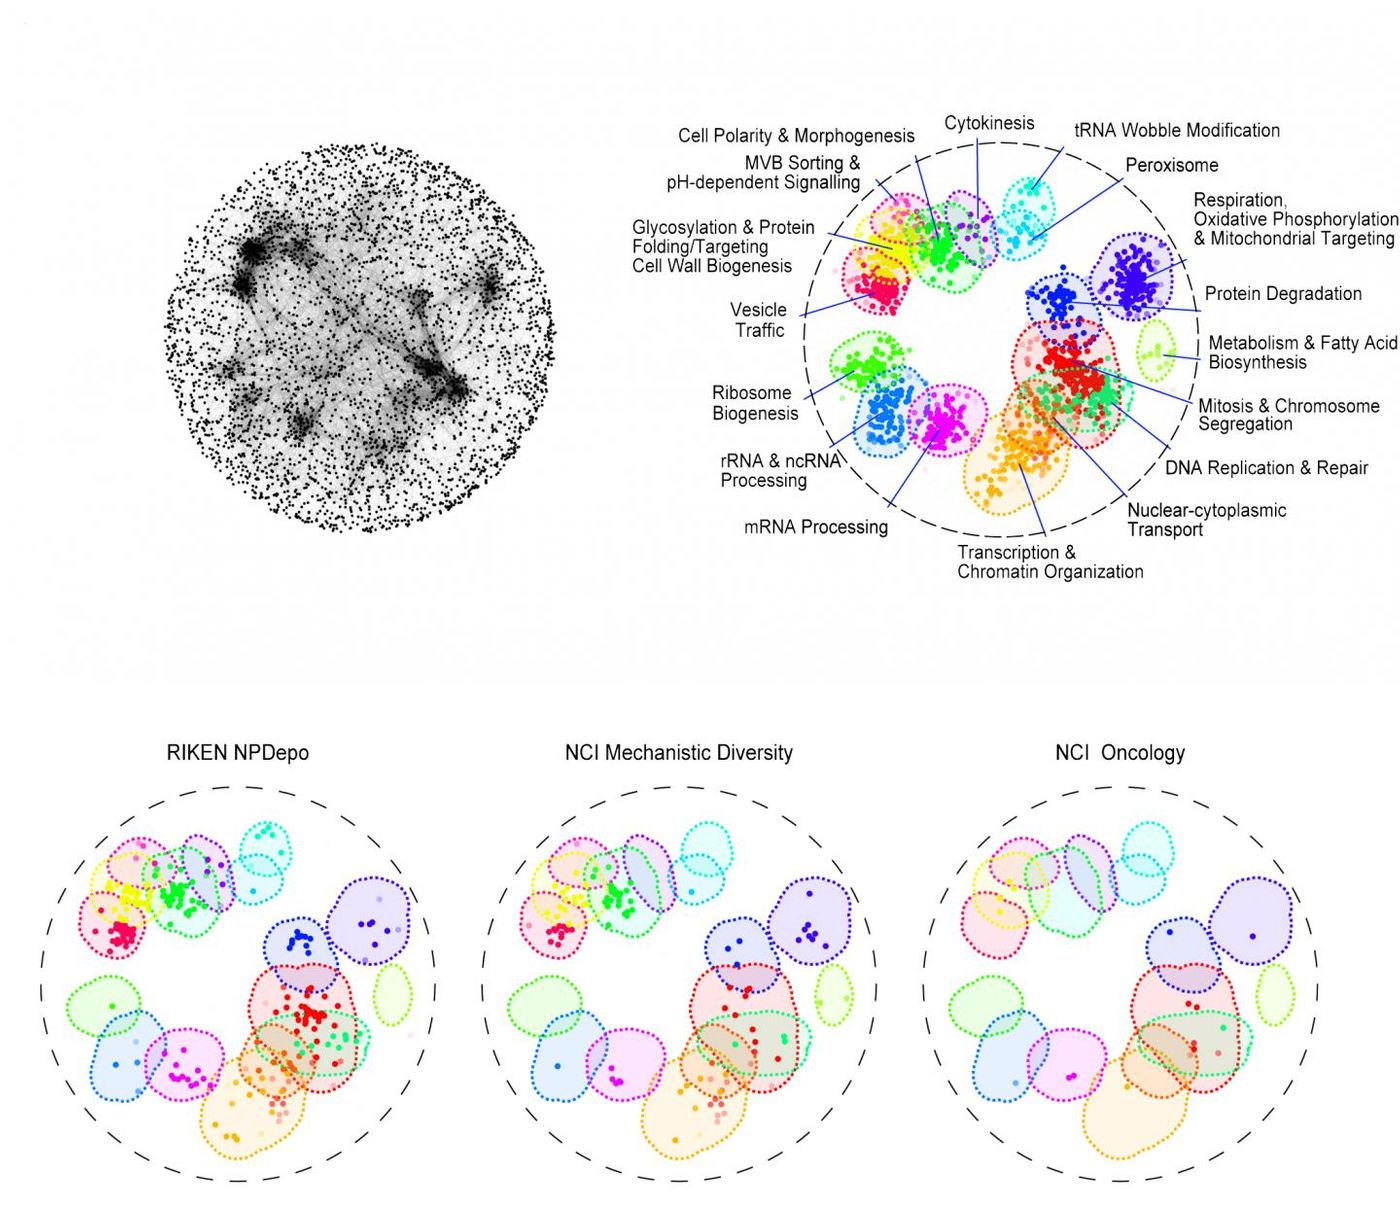 The top map (left) shows how thousands of genes interacts in yeast cells to orchestrate cellular life. On the right are shown 17 basic bioprocesses in different colours where dots represent the most important genes involved. The bottom maps were created by linking a chemical compound to a bioprocess, telling drug makers where to look for drugs that are most likely to target a specific disease. For example, the RIKEN library has more potential anti-cancer compounds (under "Mitosis and Chromosome Segregation" in red and "DNA Replication & Repair" in mint green) than other libraries. / Credit: Jeff Piotrowski